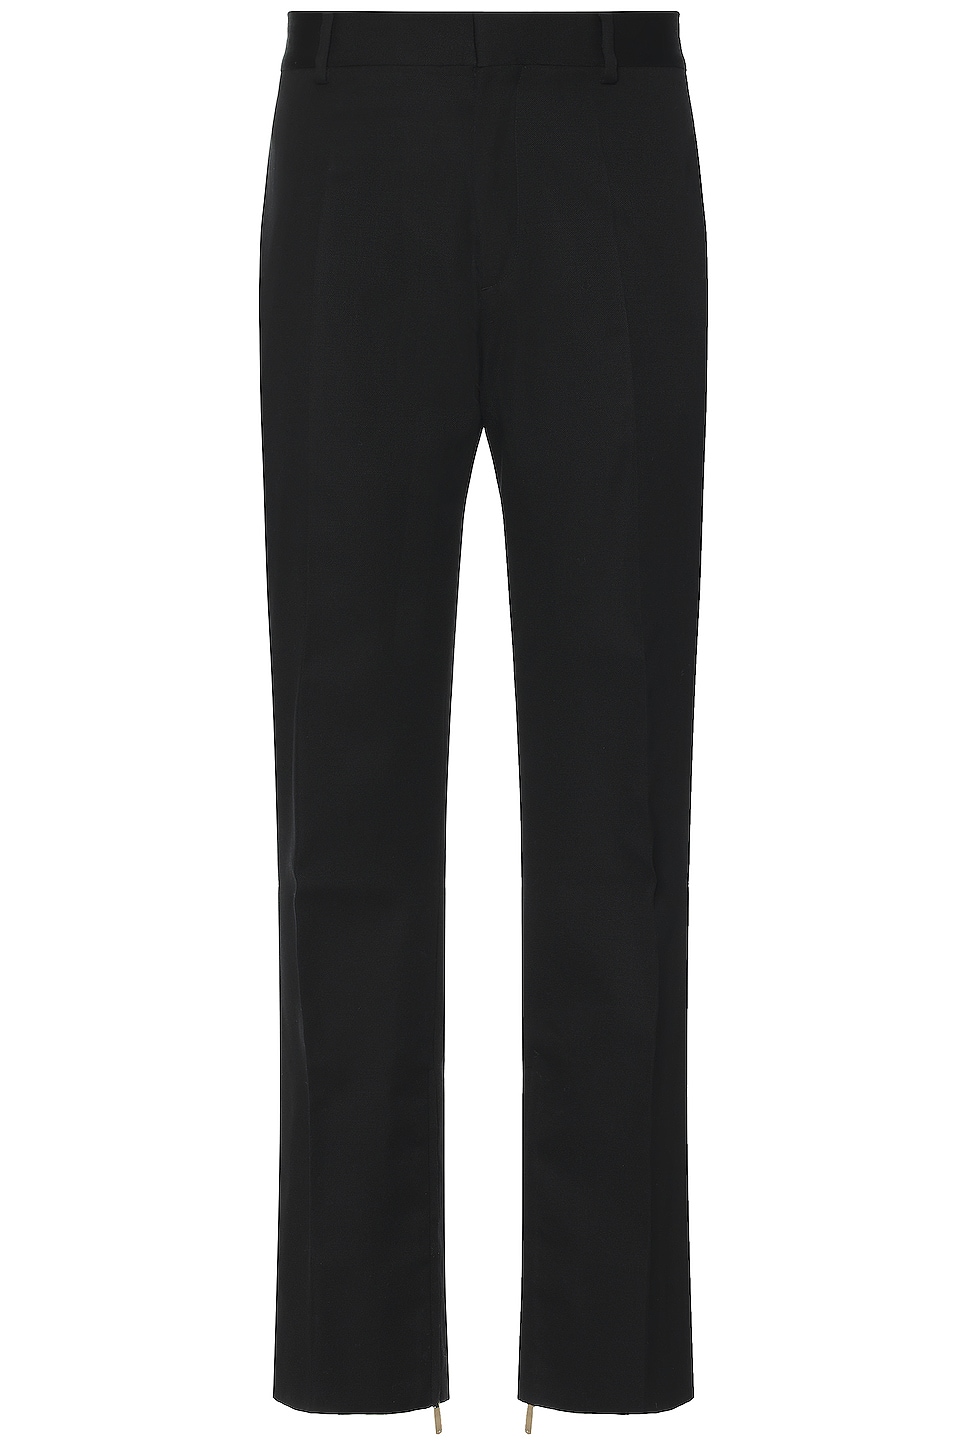 Image 1 of OFF-WHITE Drill Slim Zip Pant in Black